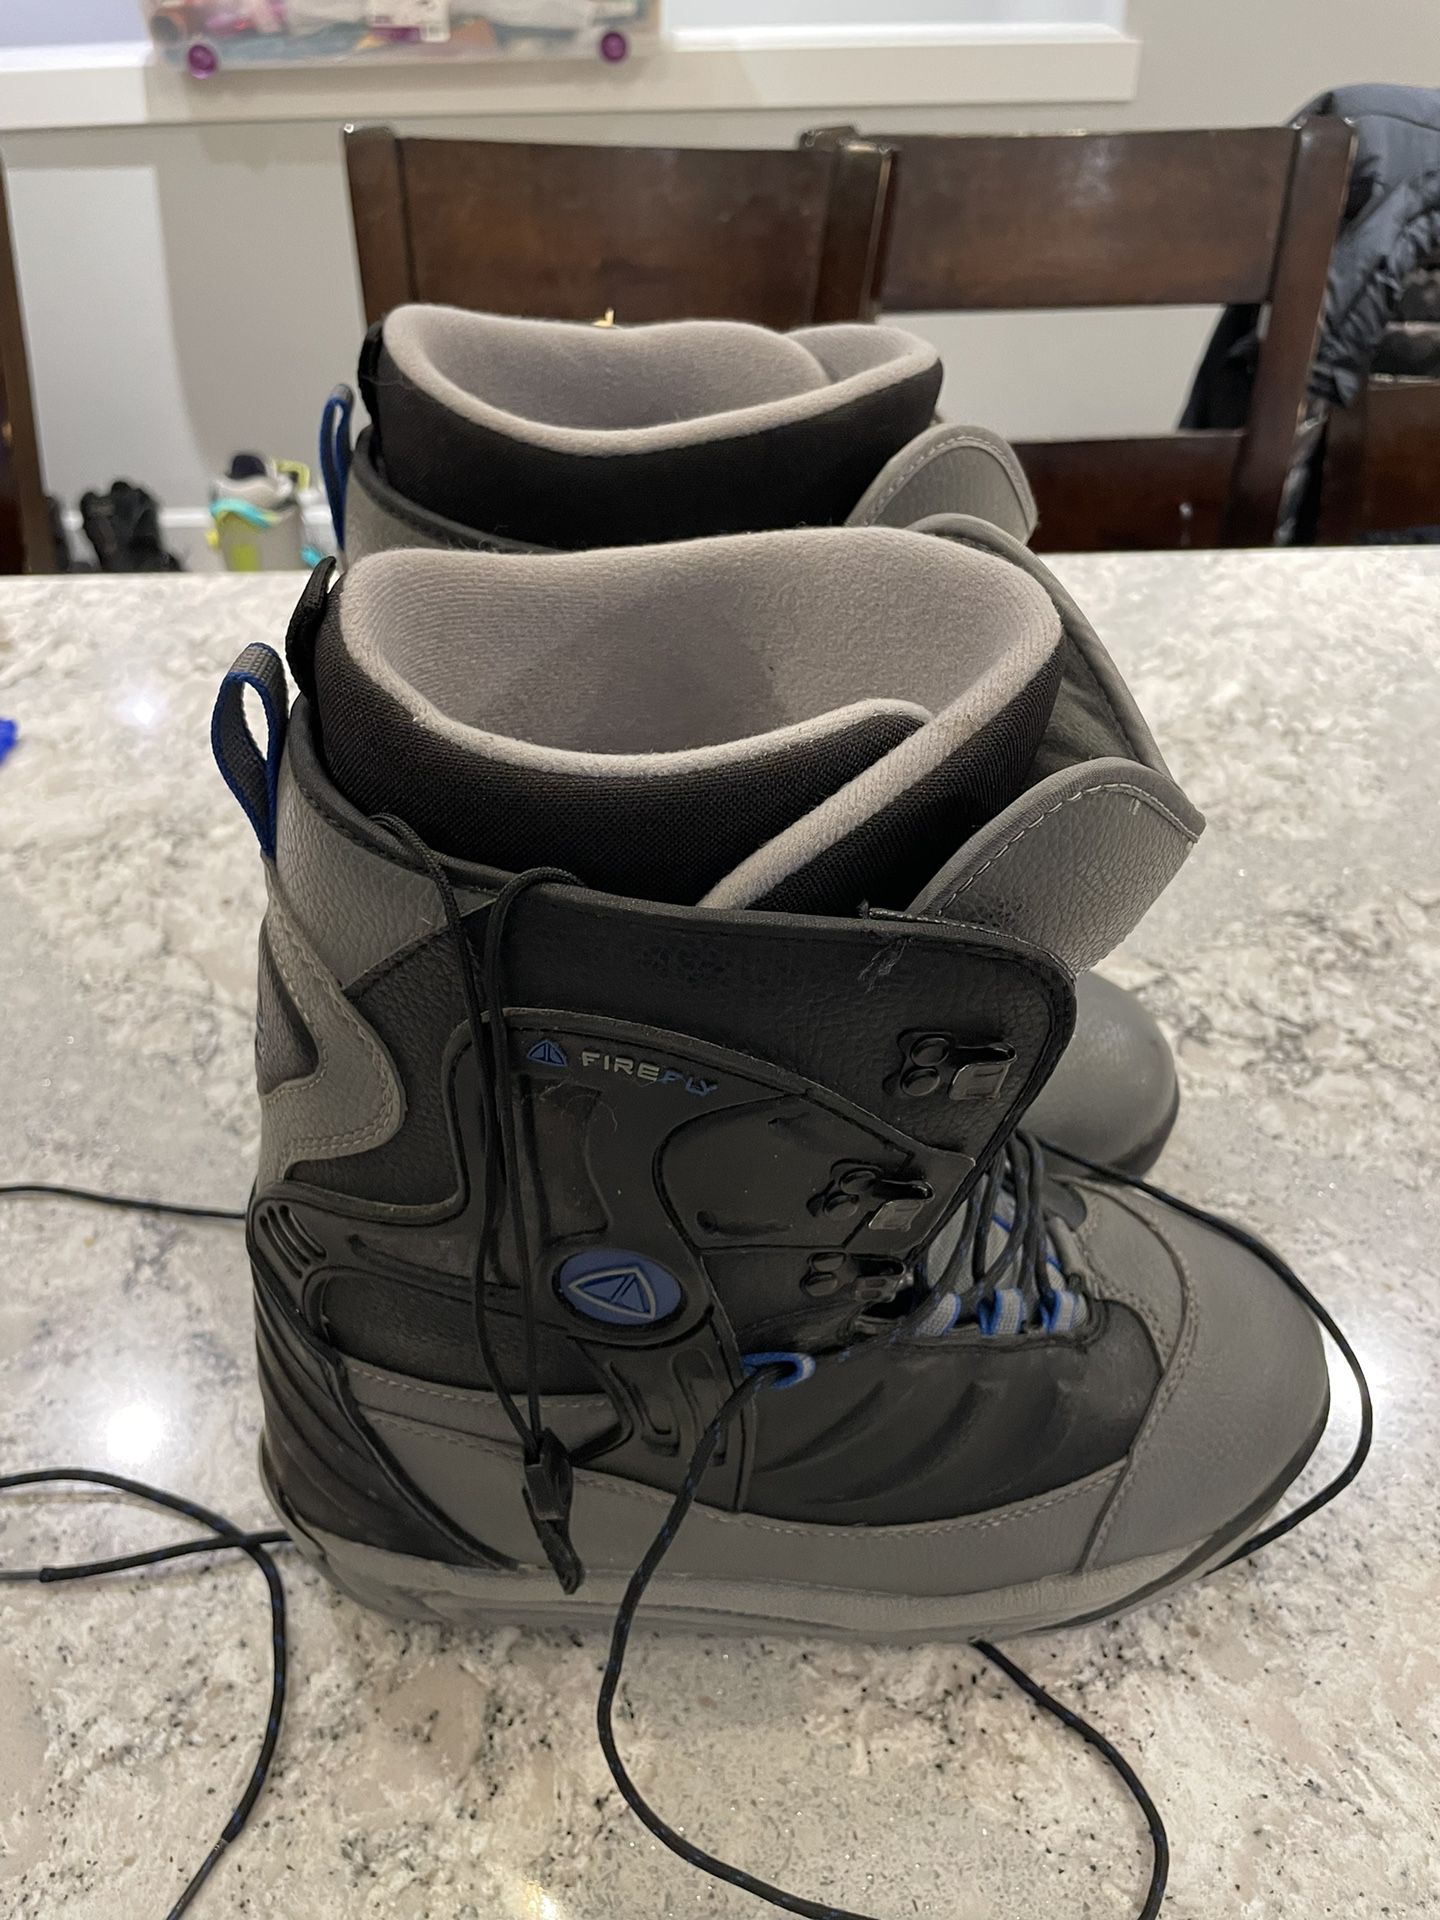 Firefly snowboard Boots Size 14